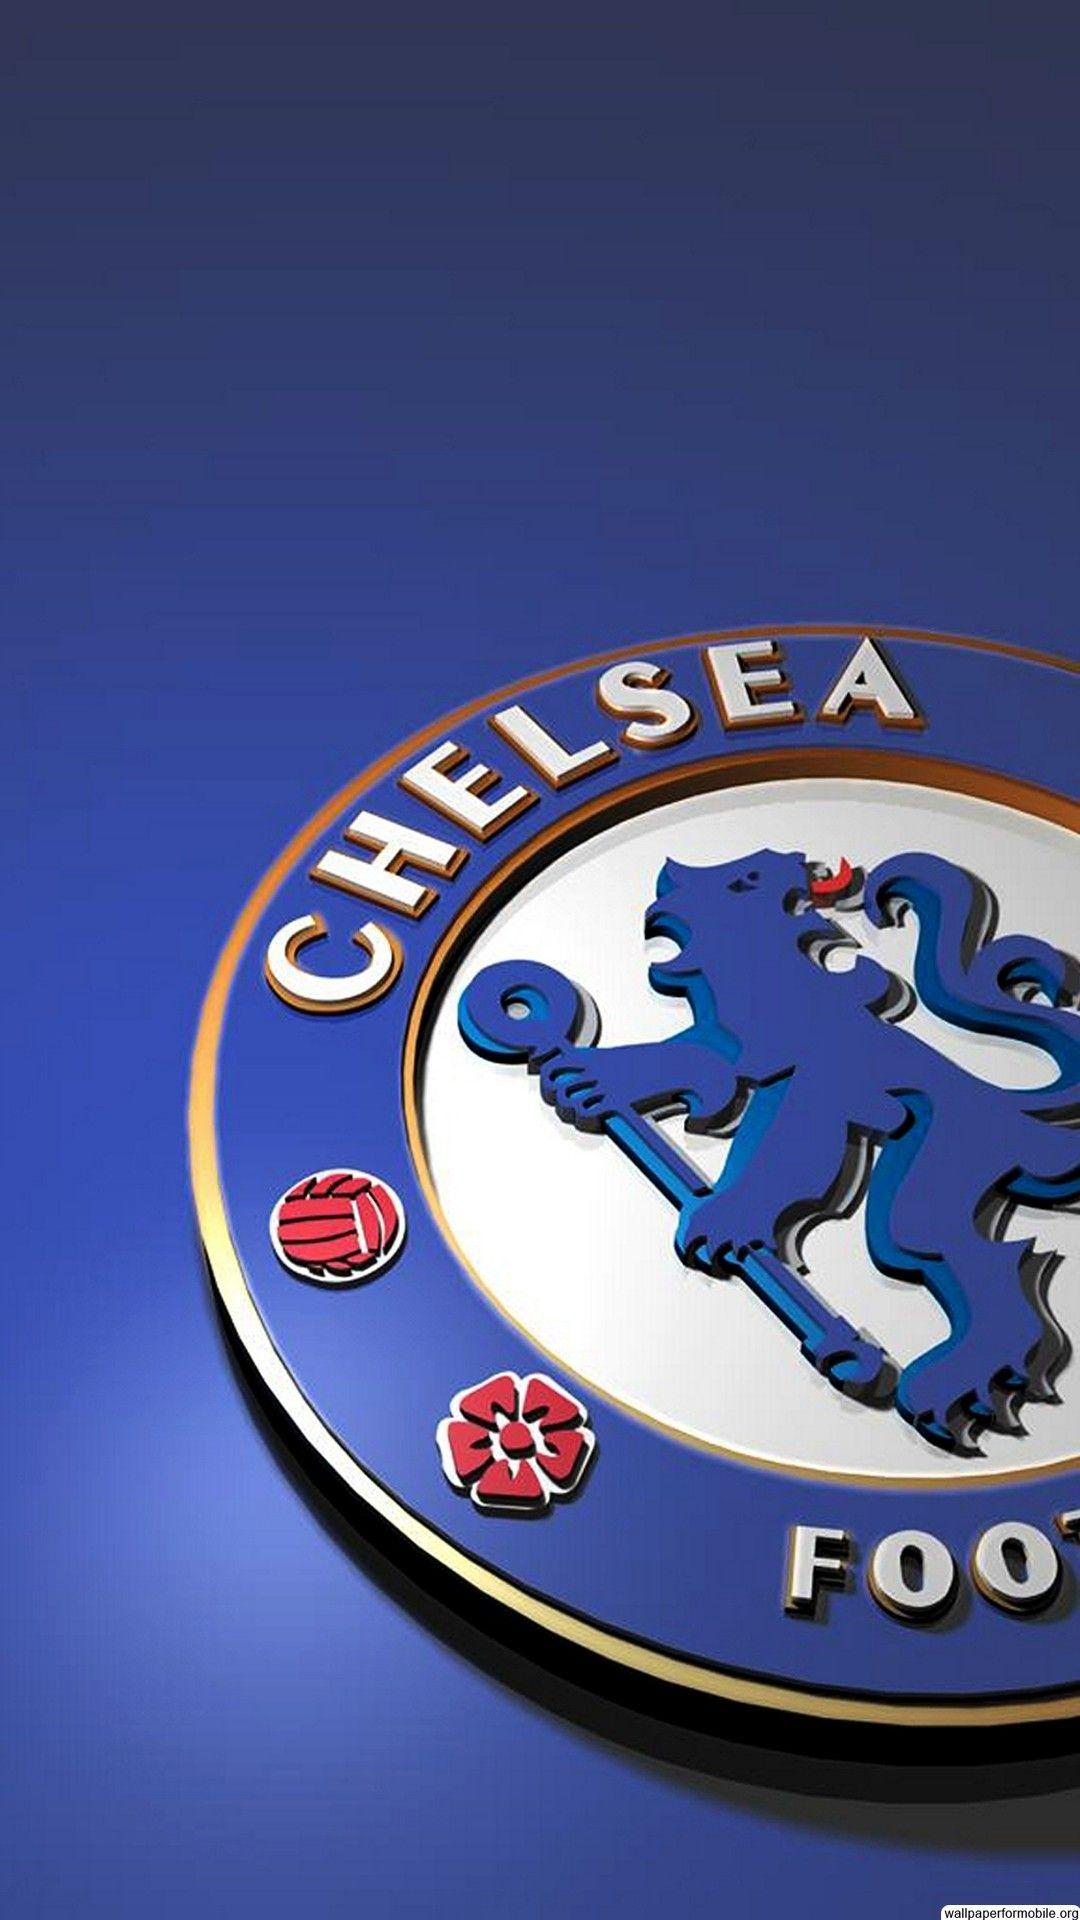 Chelsea iPhone Wallpaper Free Chelsea iPhone Background